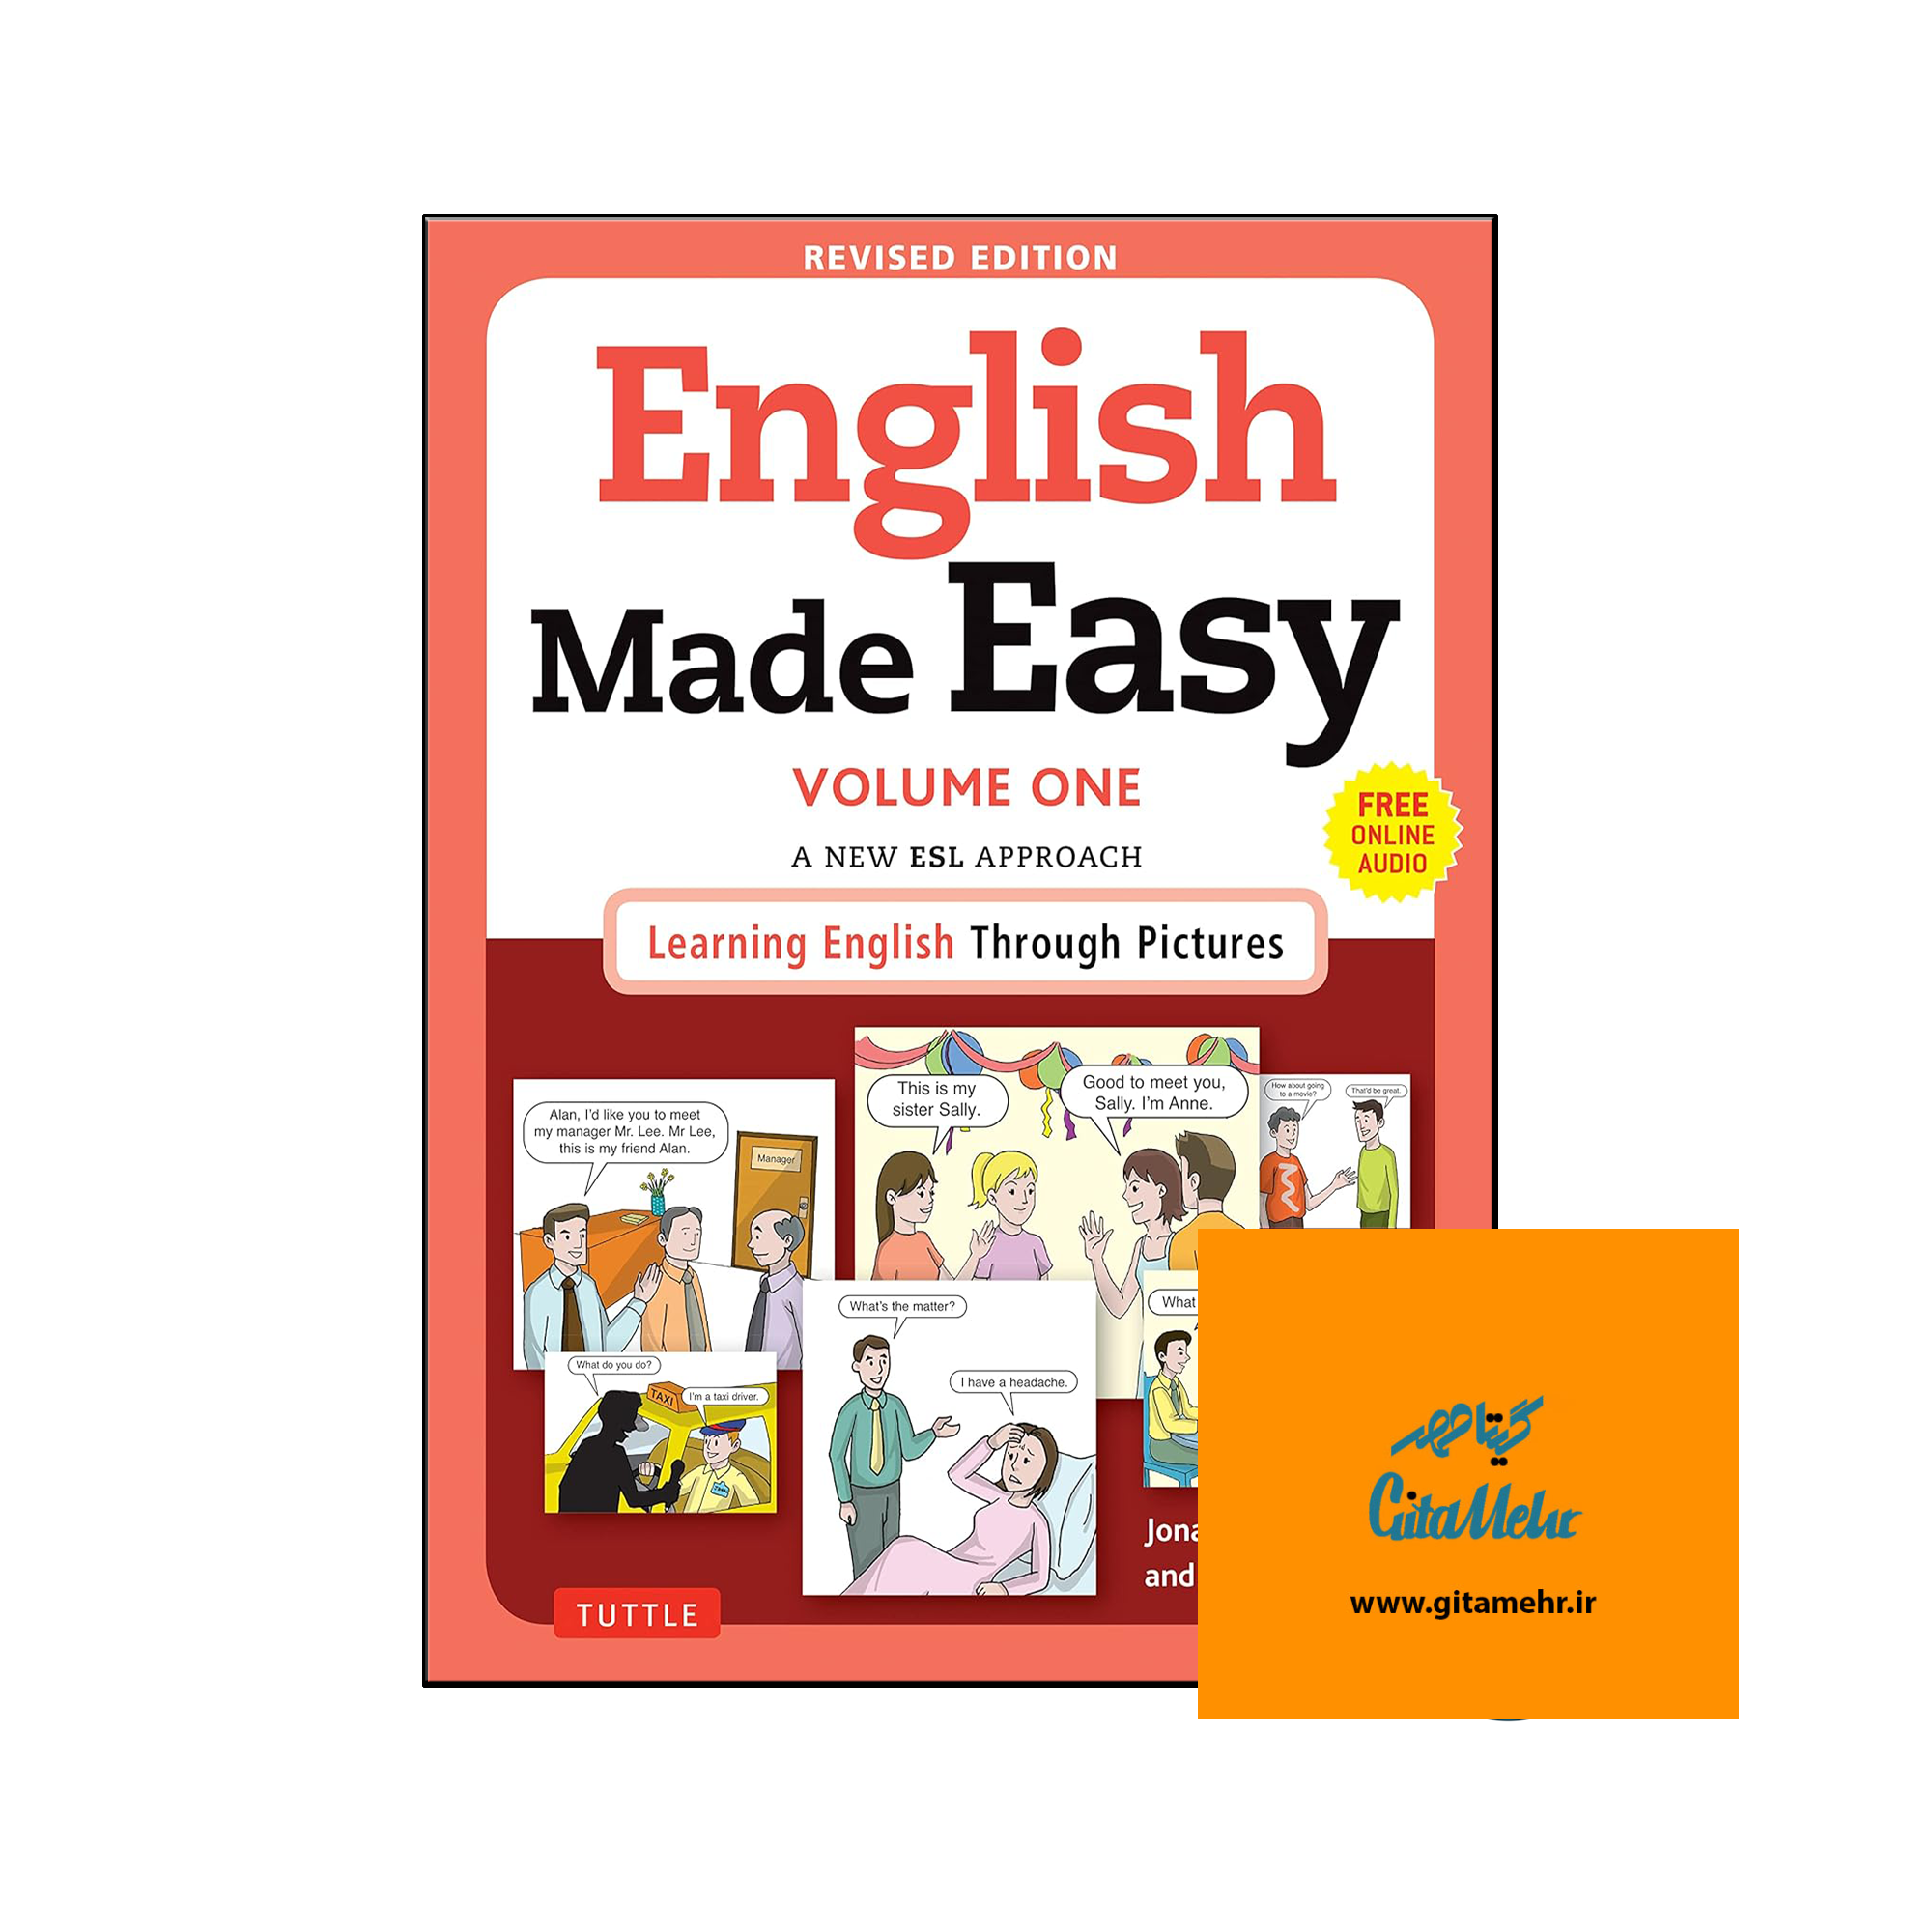 daa9d8aad8a7d8a8 english made easy volume one 65ed93d676be6